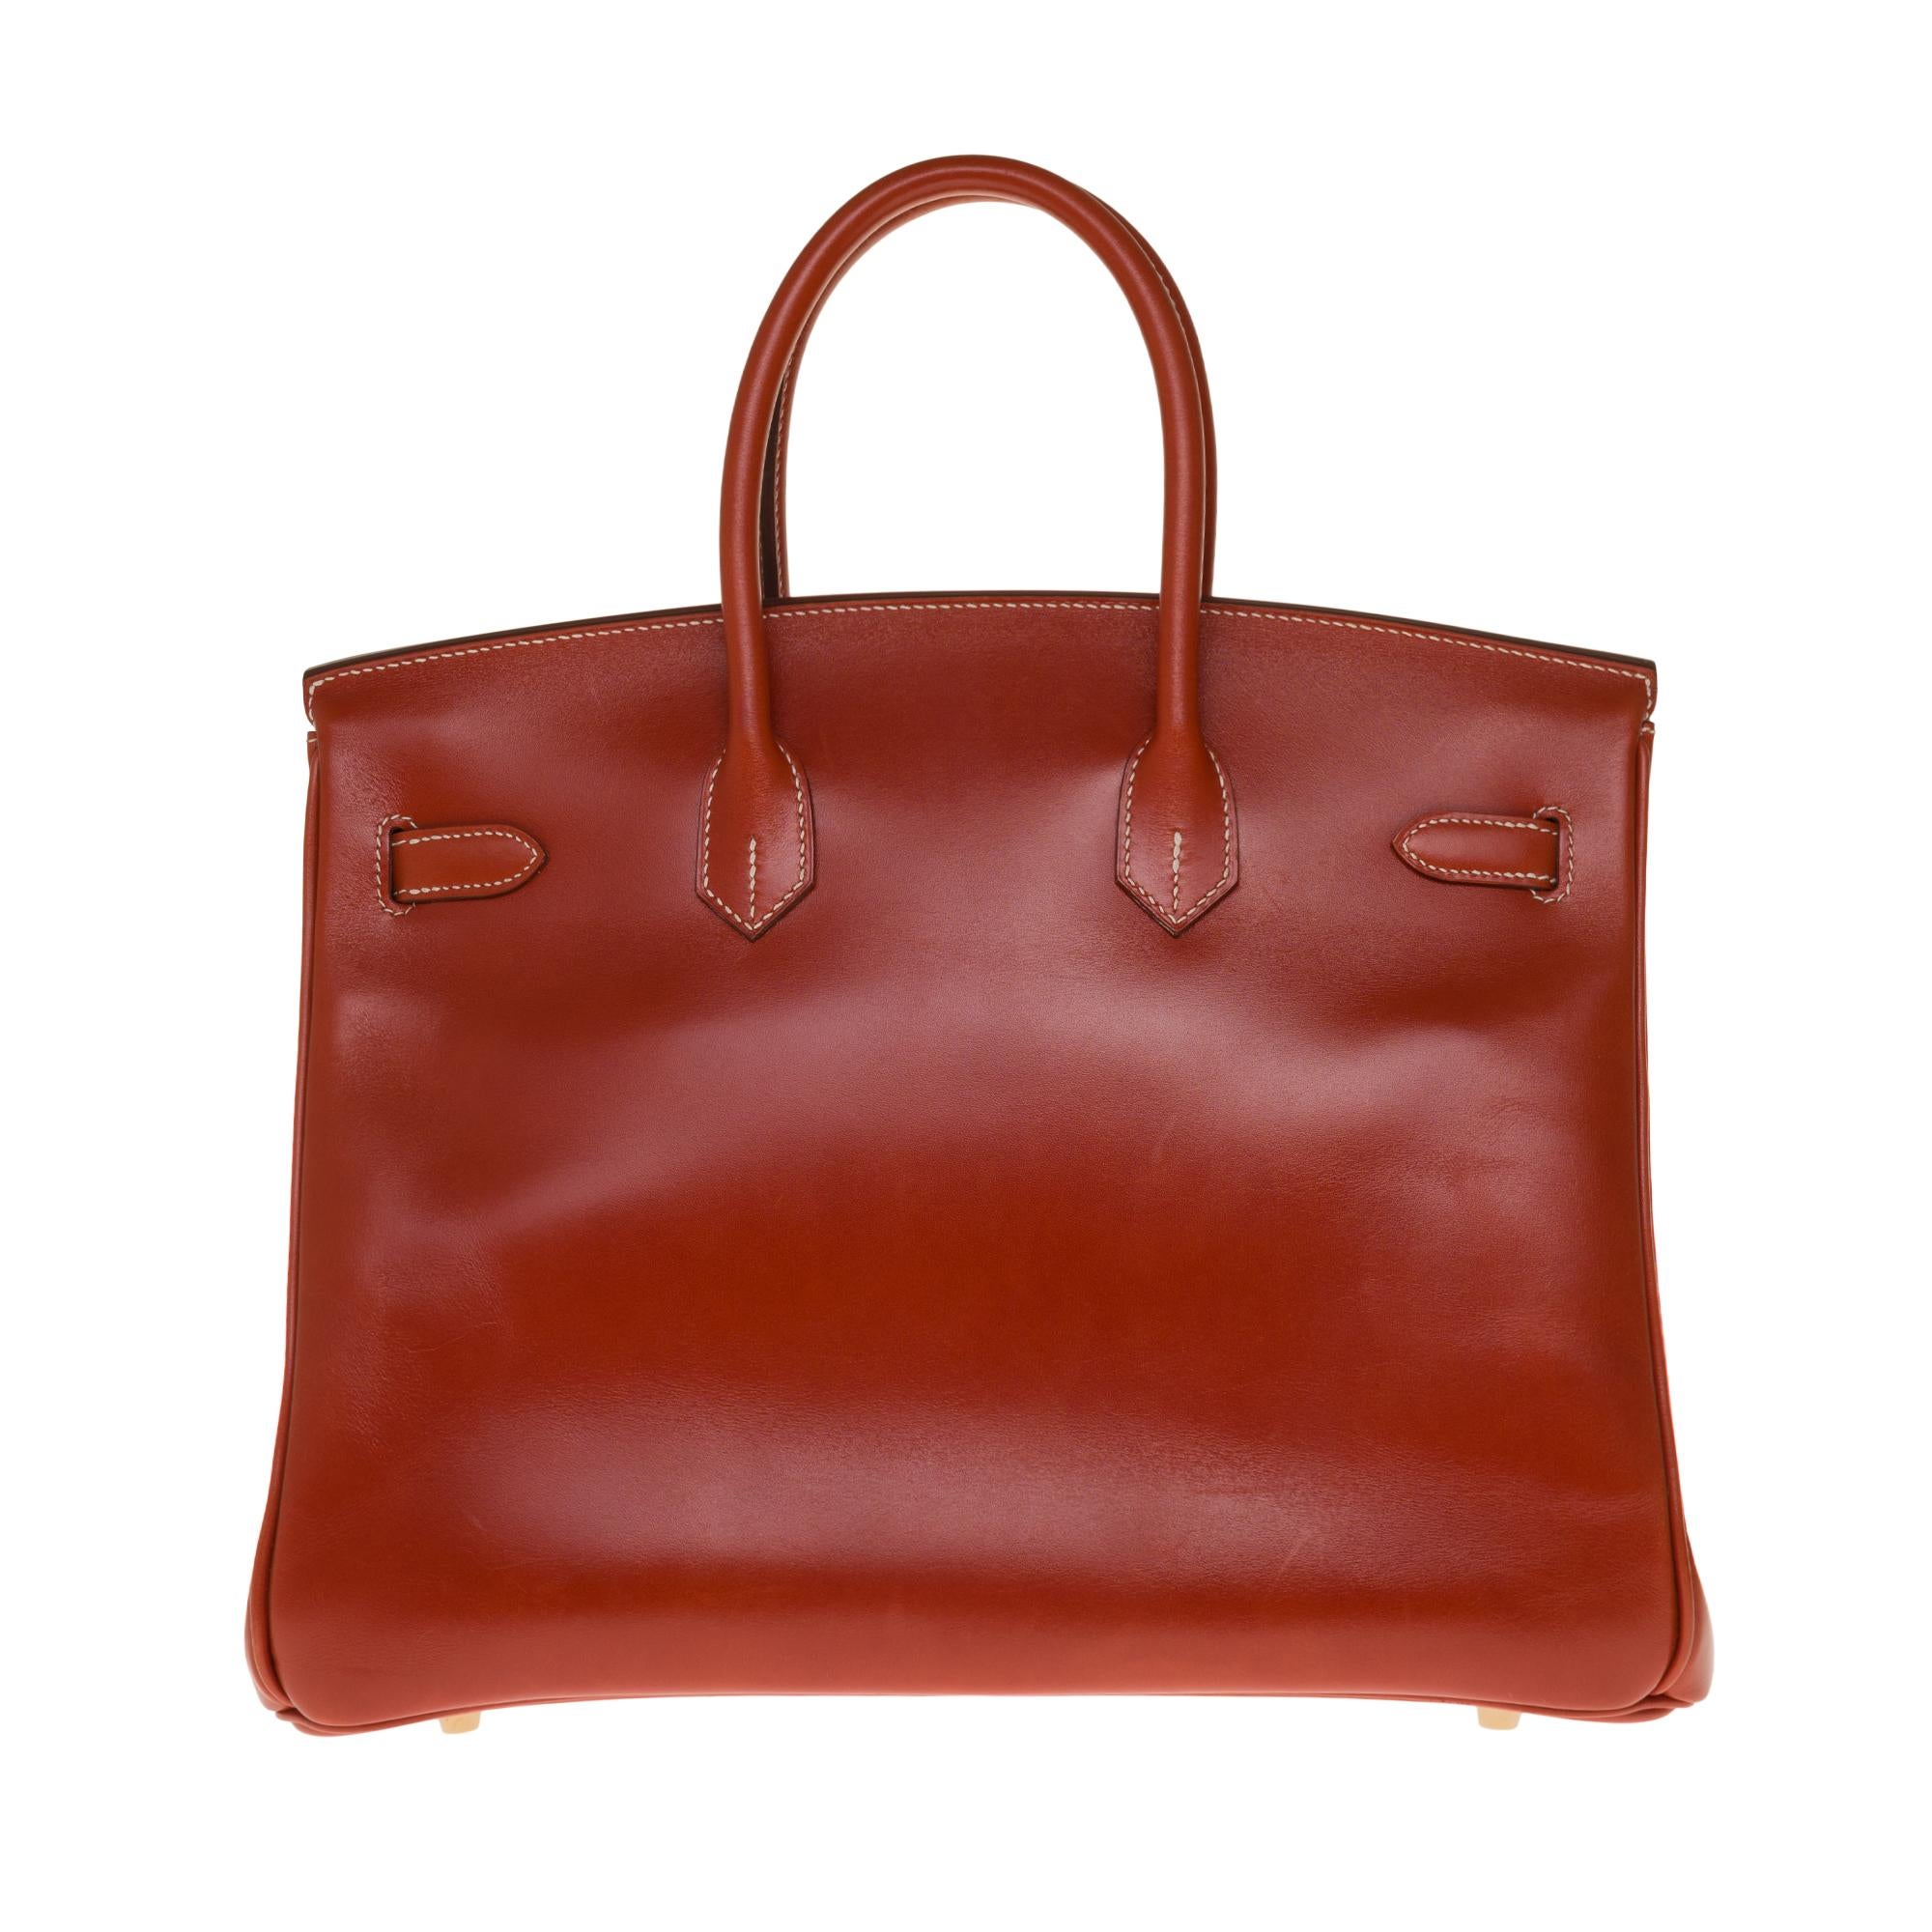 Exceptional & Rare handbag Hermes Birkin 30 cm in brick calfskin box leather with white stitching, gold plated metal hardware, double handle in leather box brick allowing a handheld

Flap closure
Inner lining in brick leather, one zip pocket, one